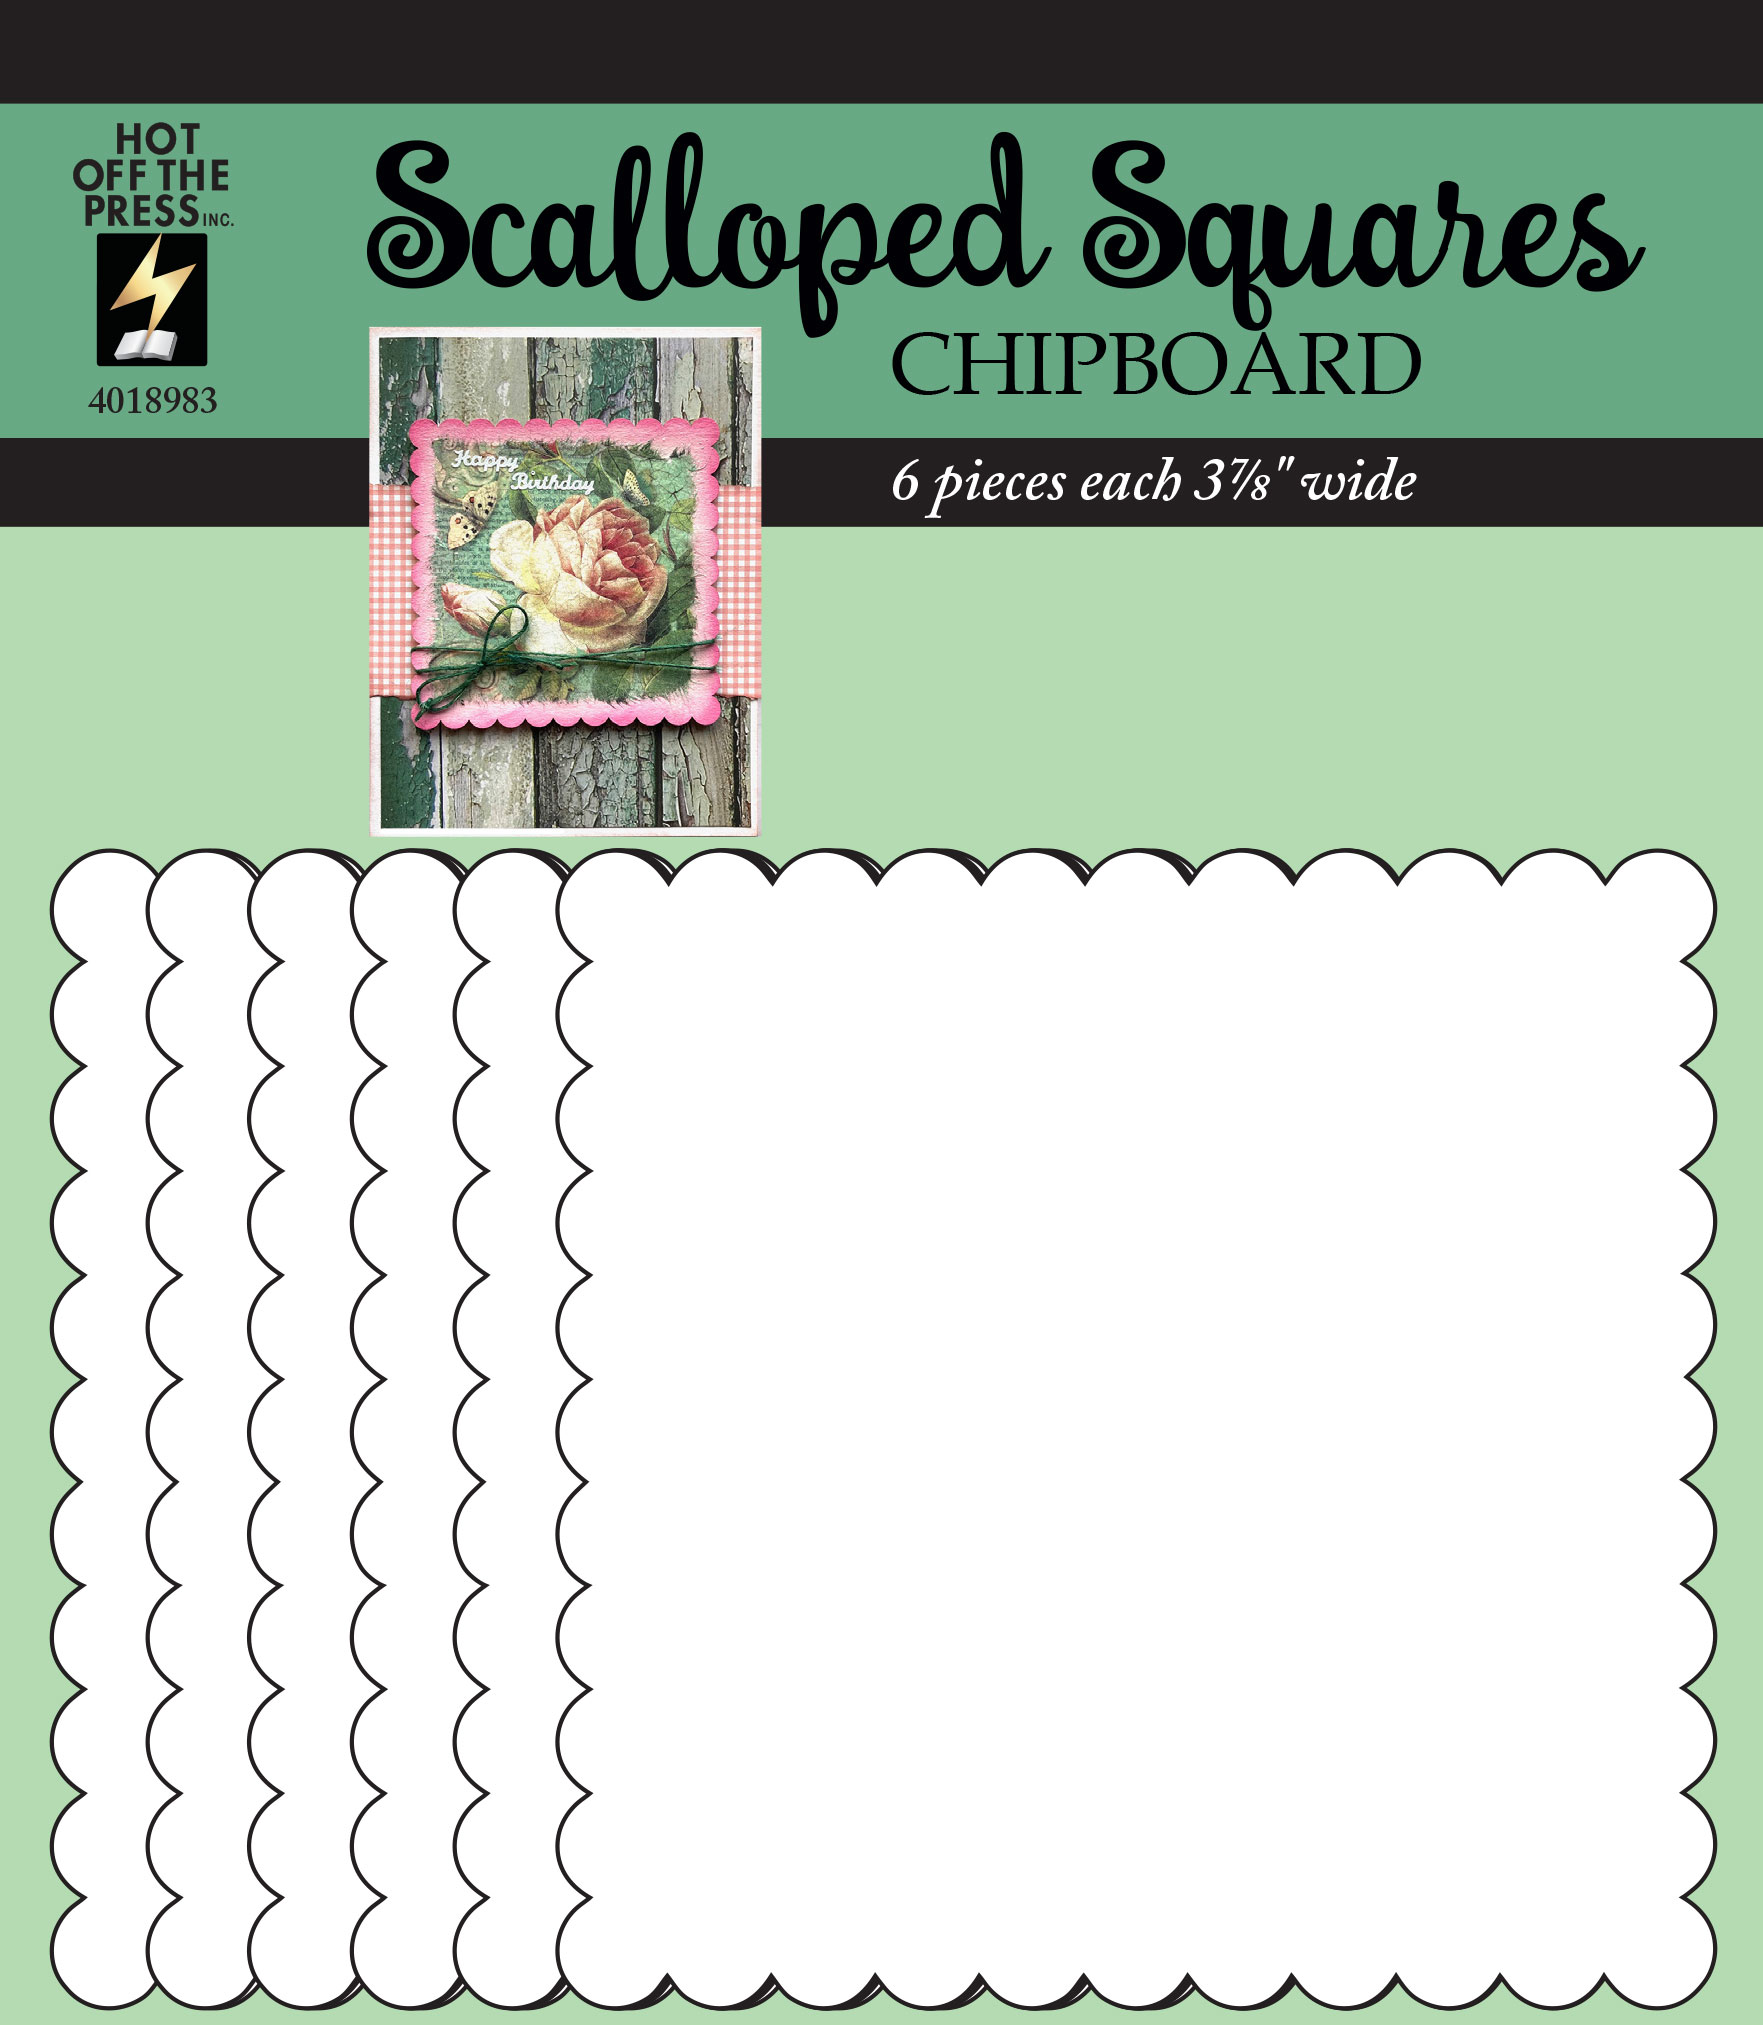 Scalloped Squares Chipboard, 6 pieces